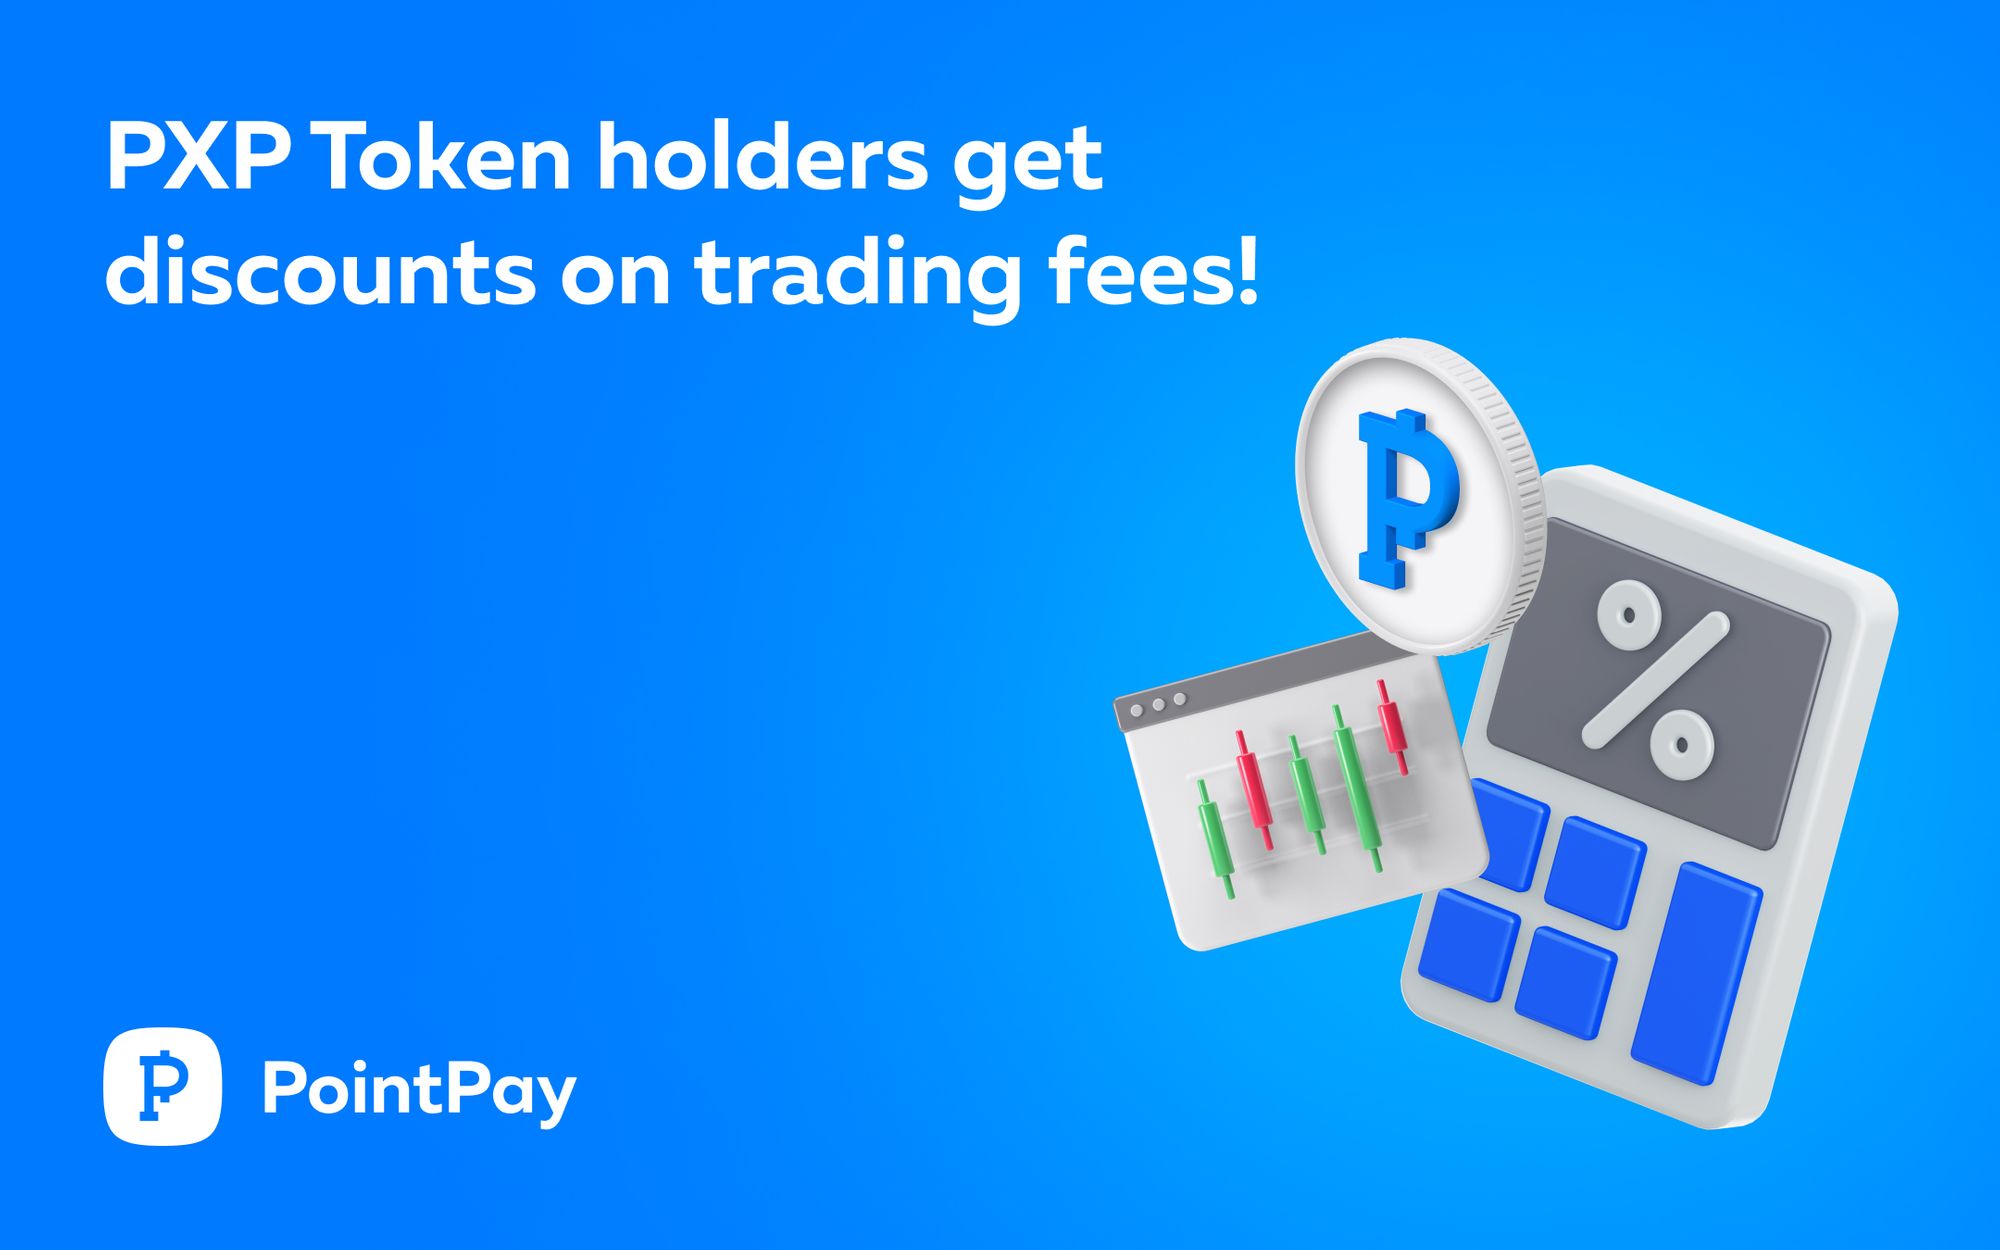 PointPay launched discounts on trading fees for PXP token holders!